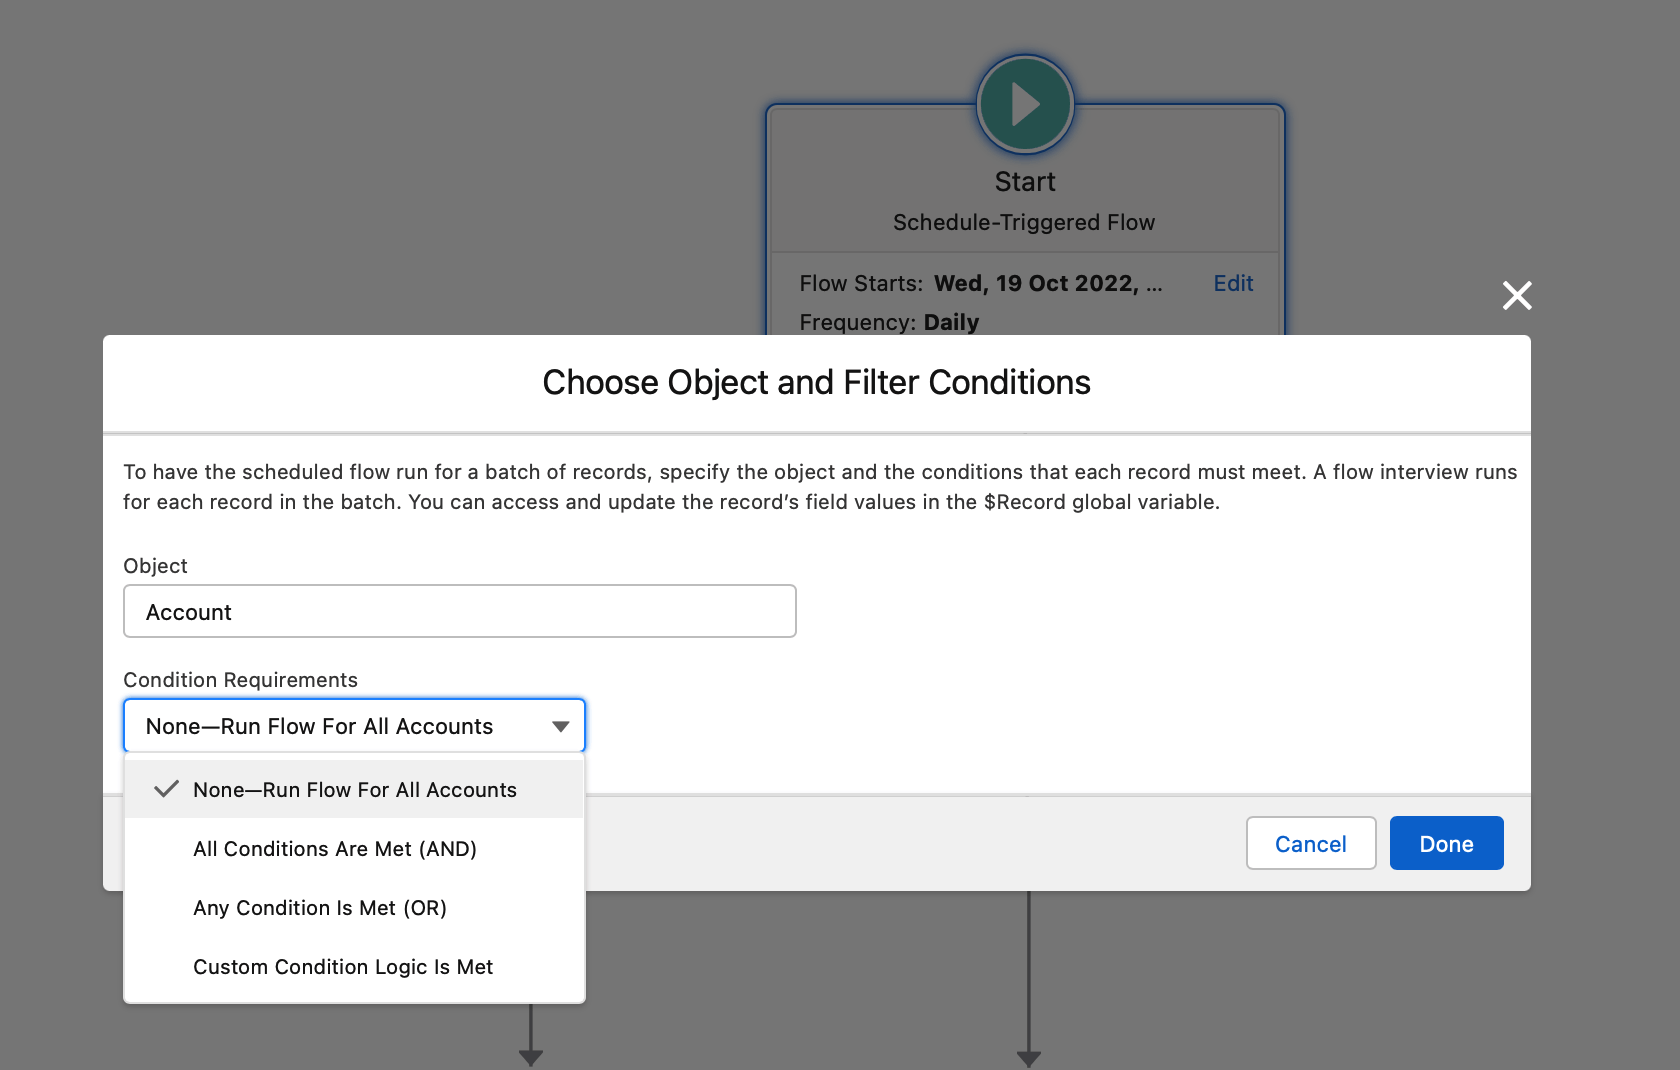 Pop up allowing you to choose which object is queried